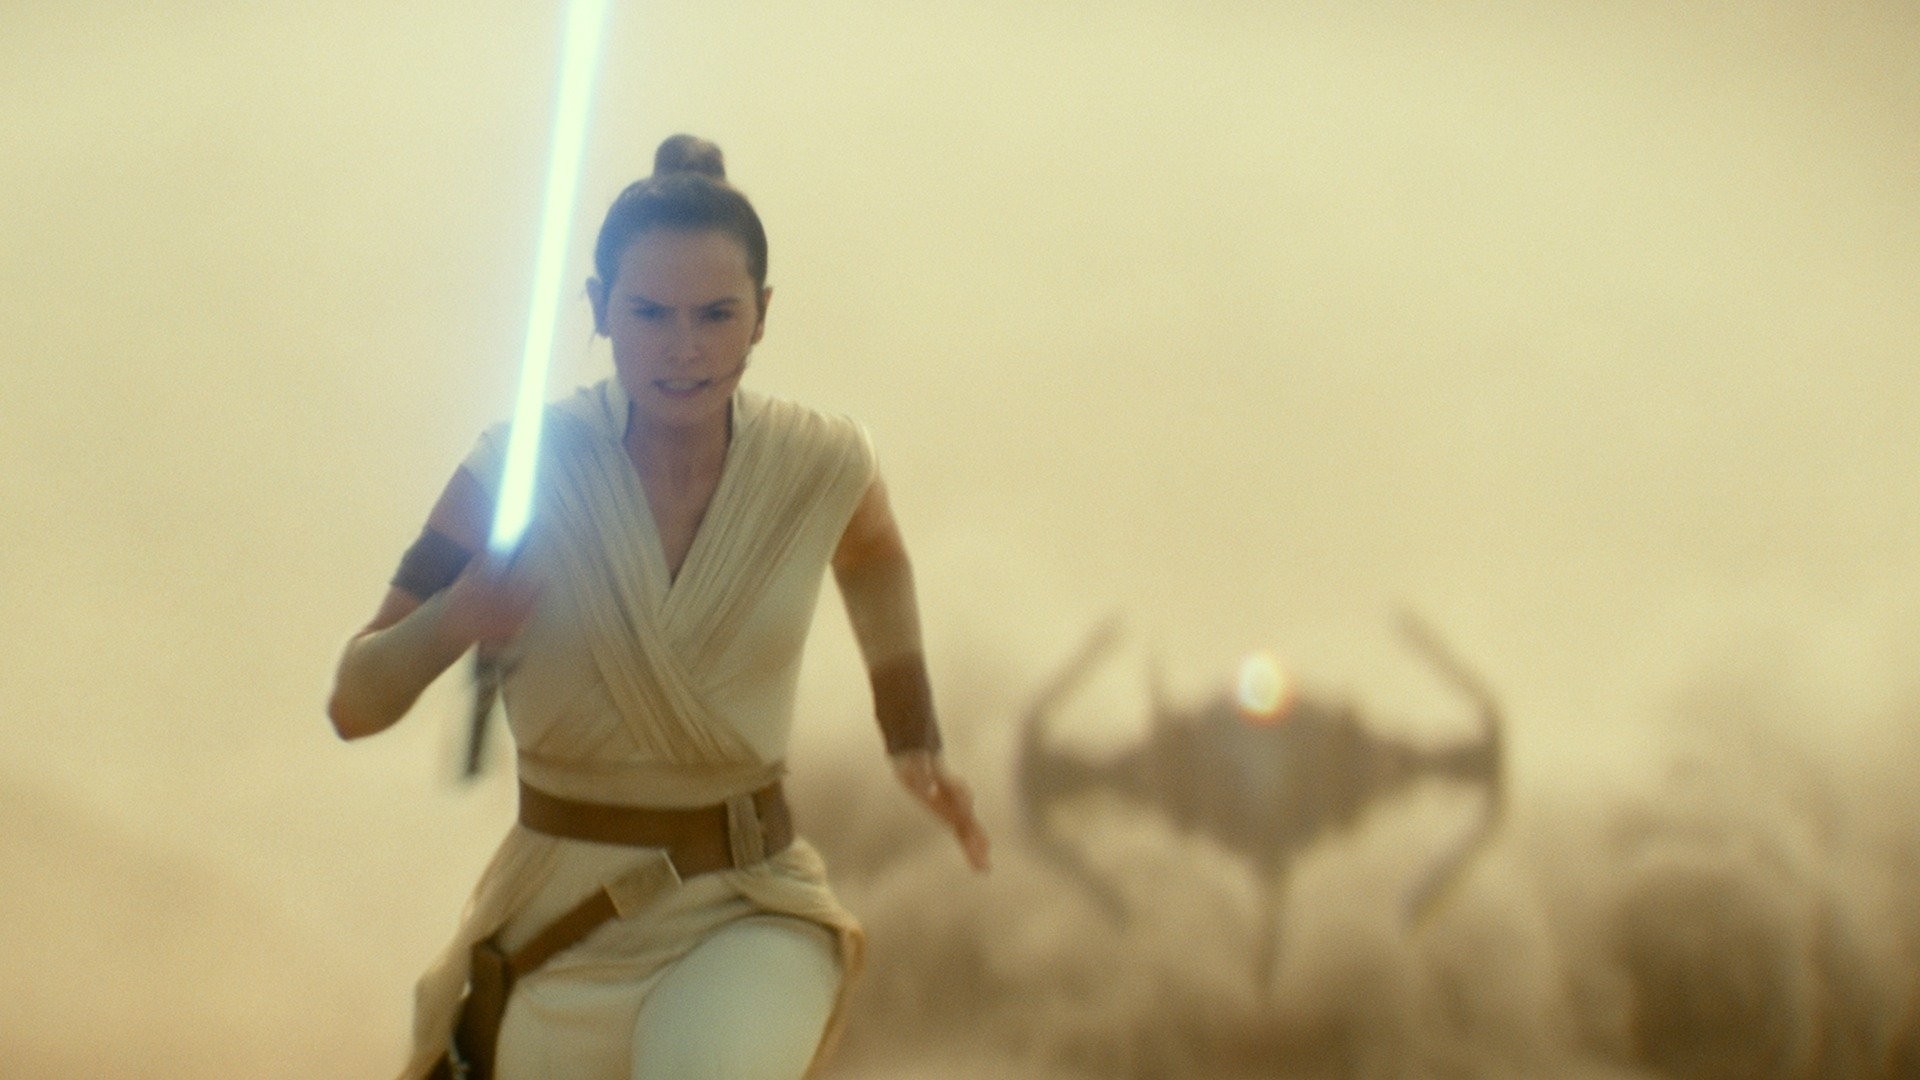 Star Wars: The Rise Of Skywalker' Exclusive Look With The Cast